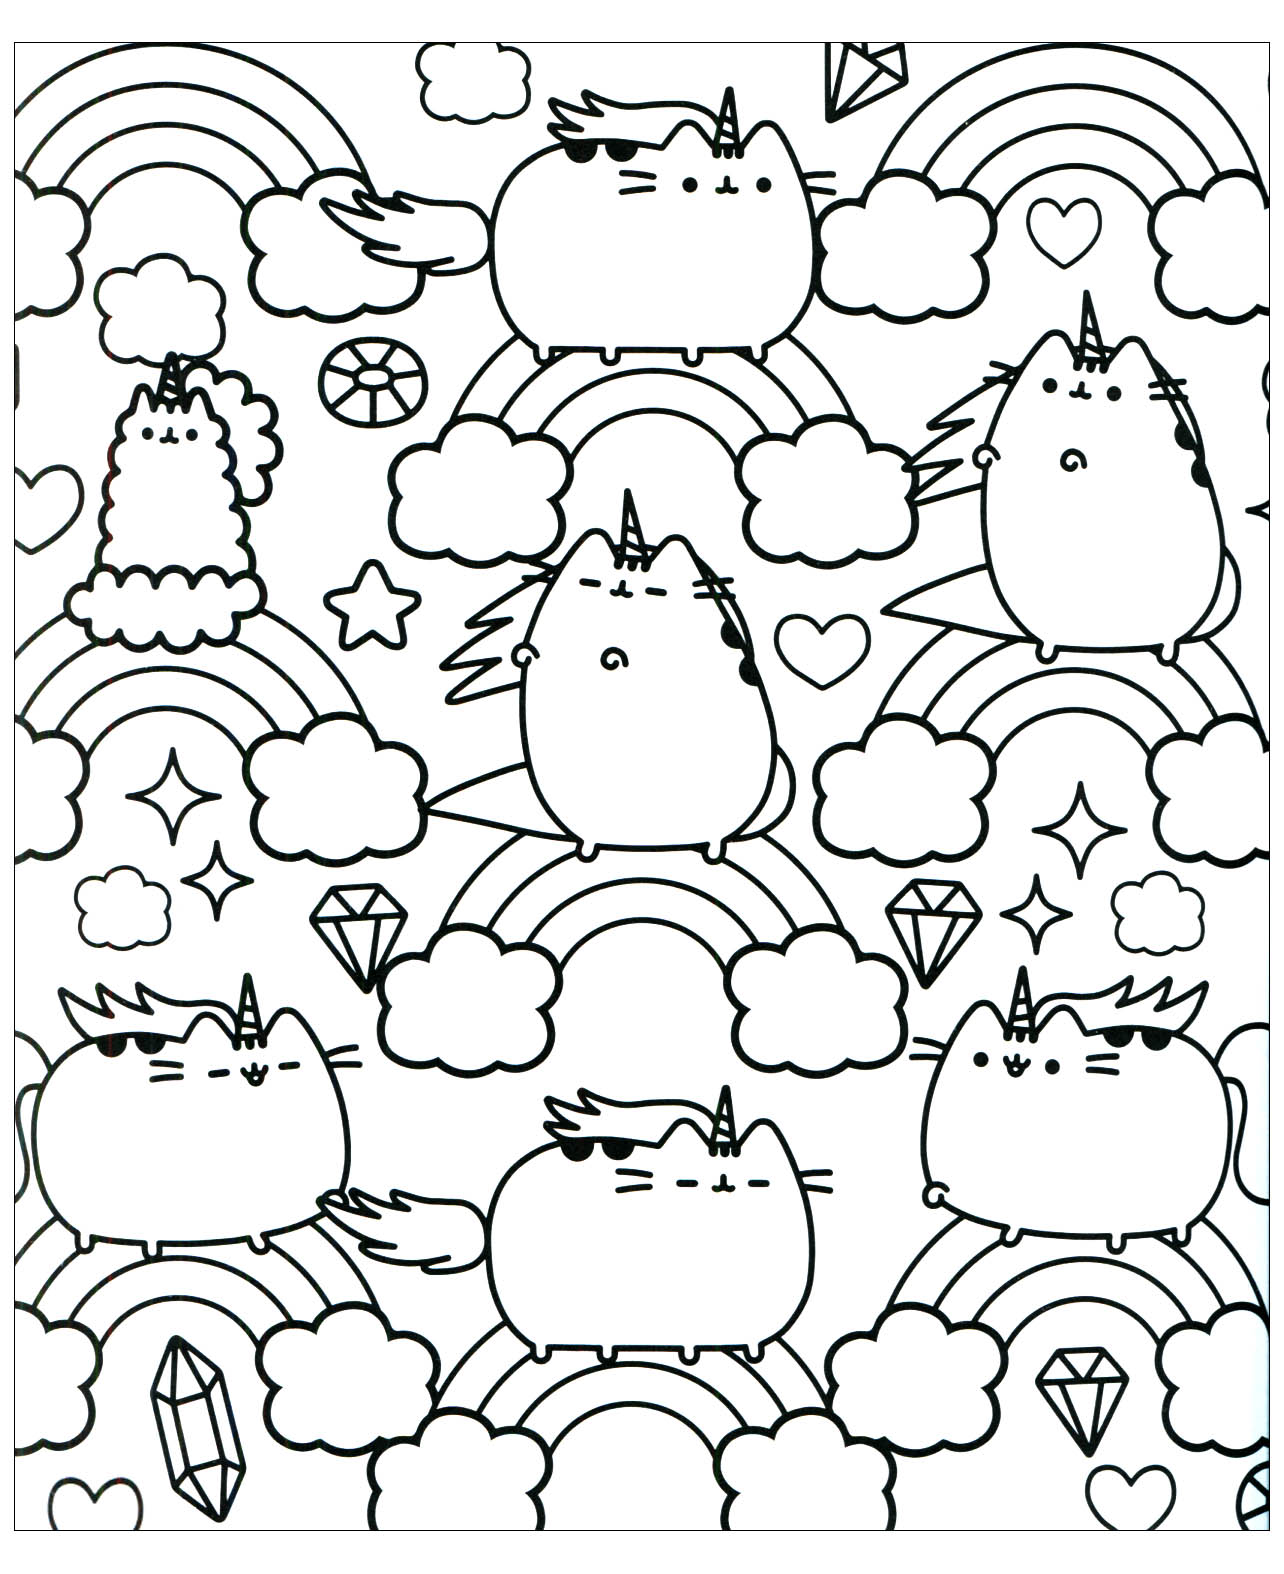 Doodling Doodle art Coloring pages for adults JustColor